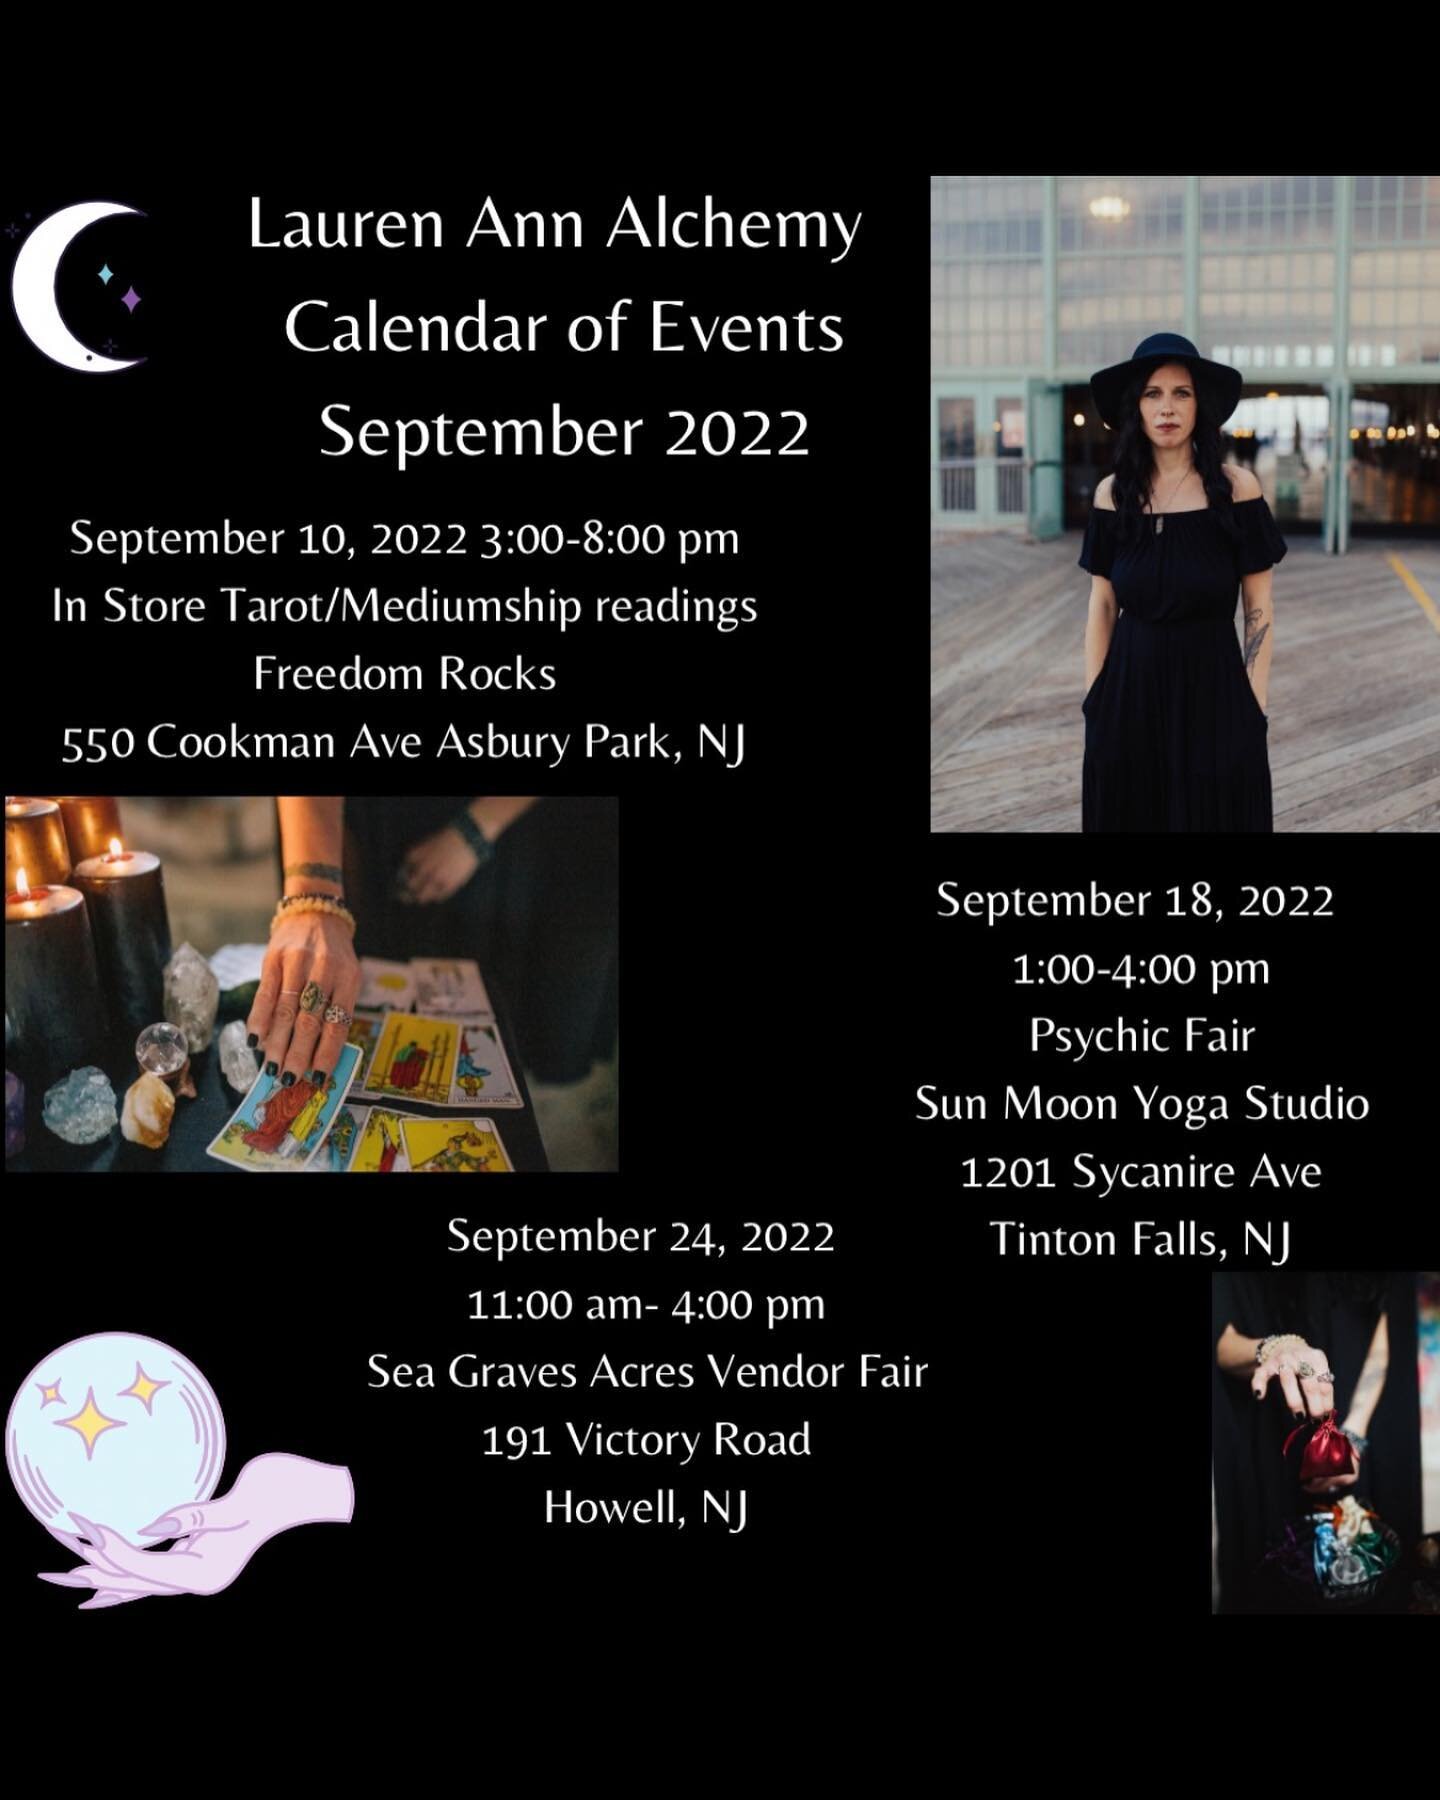 🍂Hello September 🍂

🍁Come on out and see your favorite sea witch of Asbury Park at one of my many events lined up for the beginning of the best time of year!🍁

🌞 I had such a BEAUTIFUL summer meeting you all, spending time with old friends and v